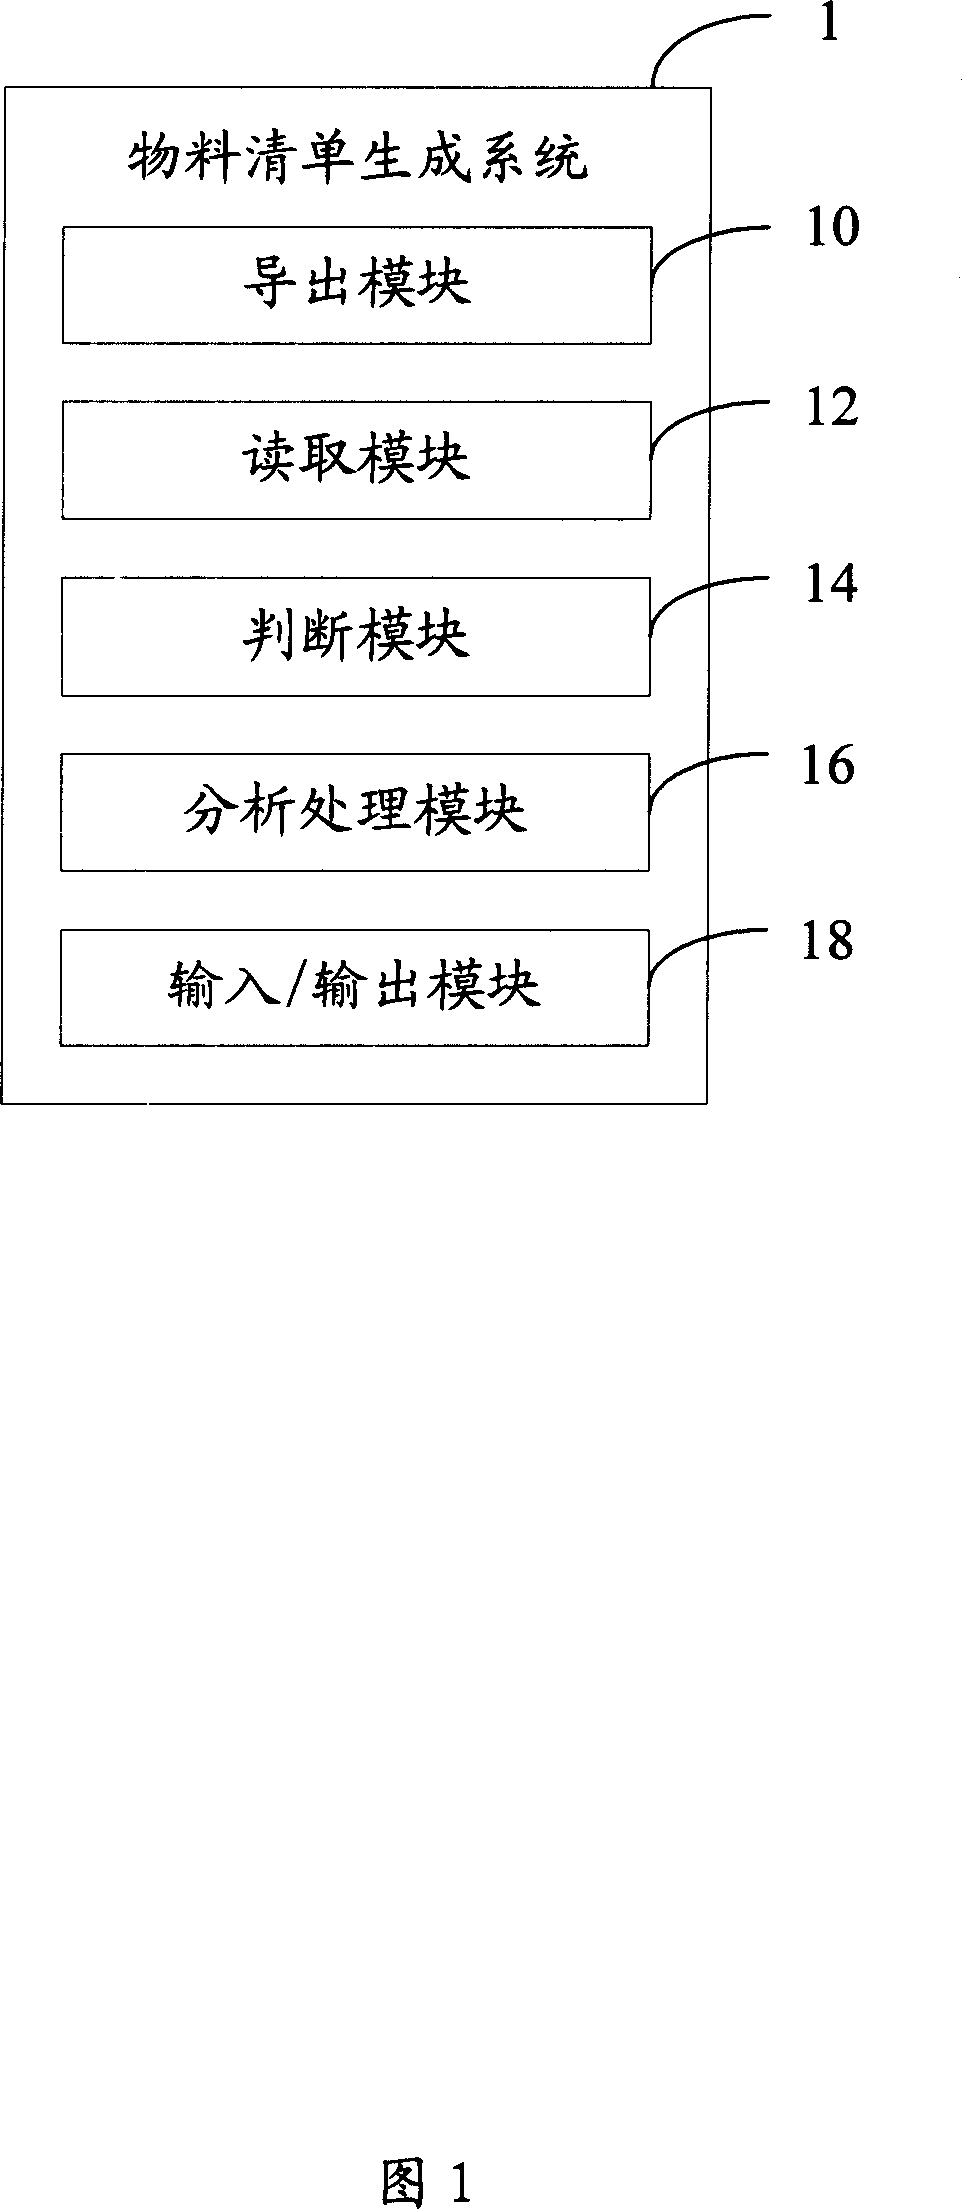 Materials list generation system and method